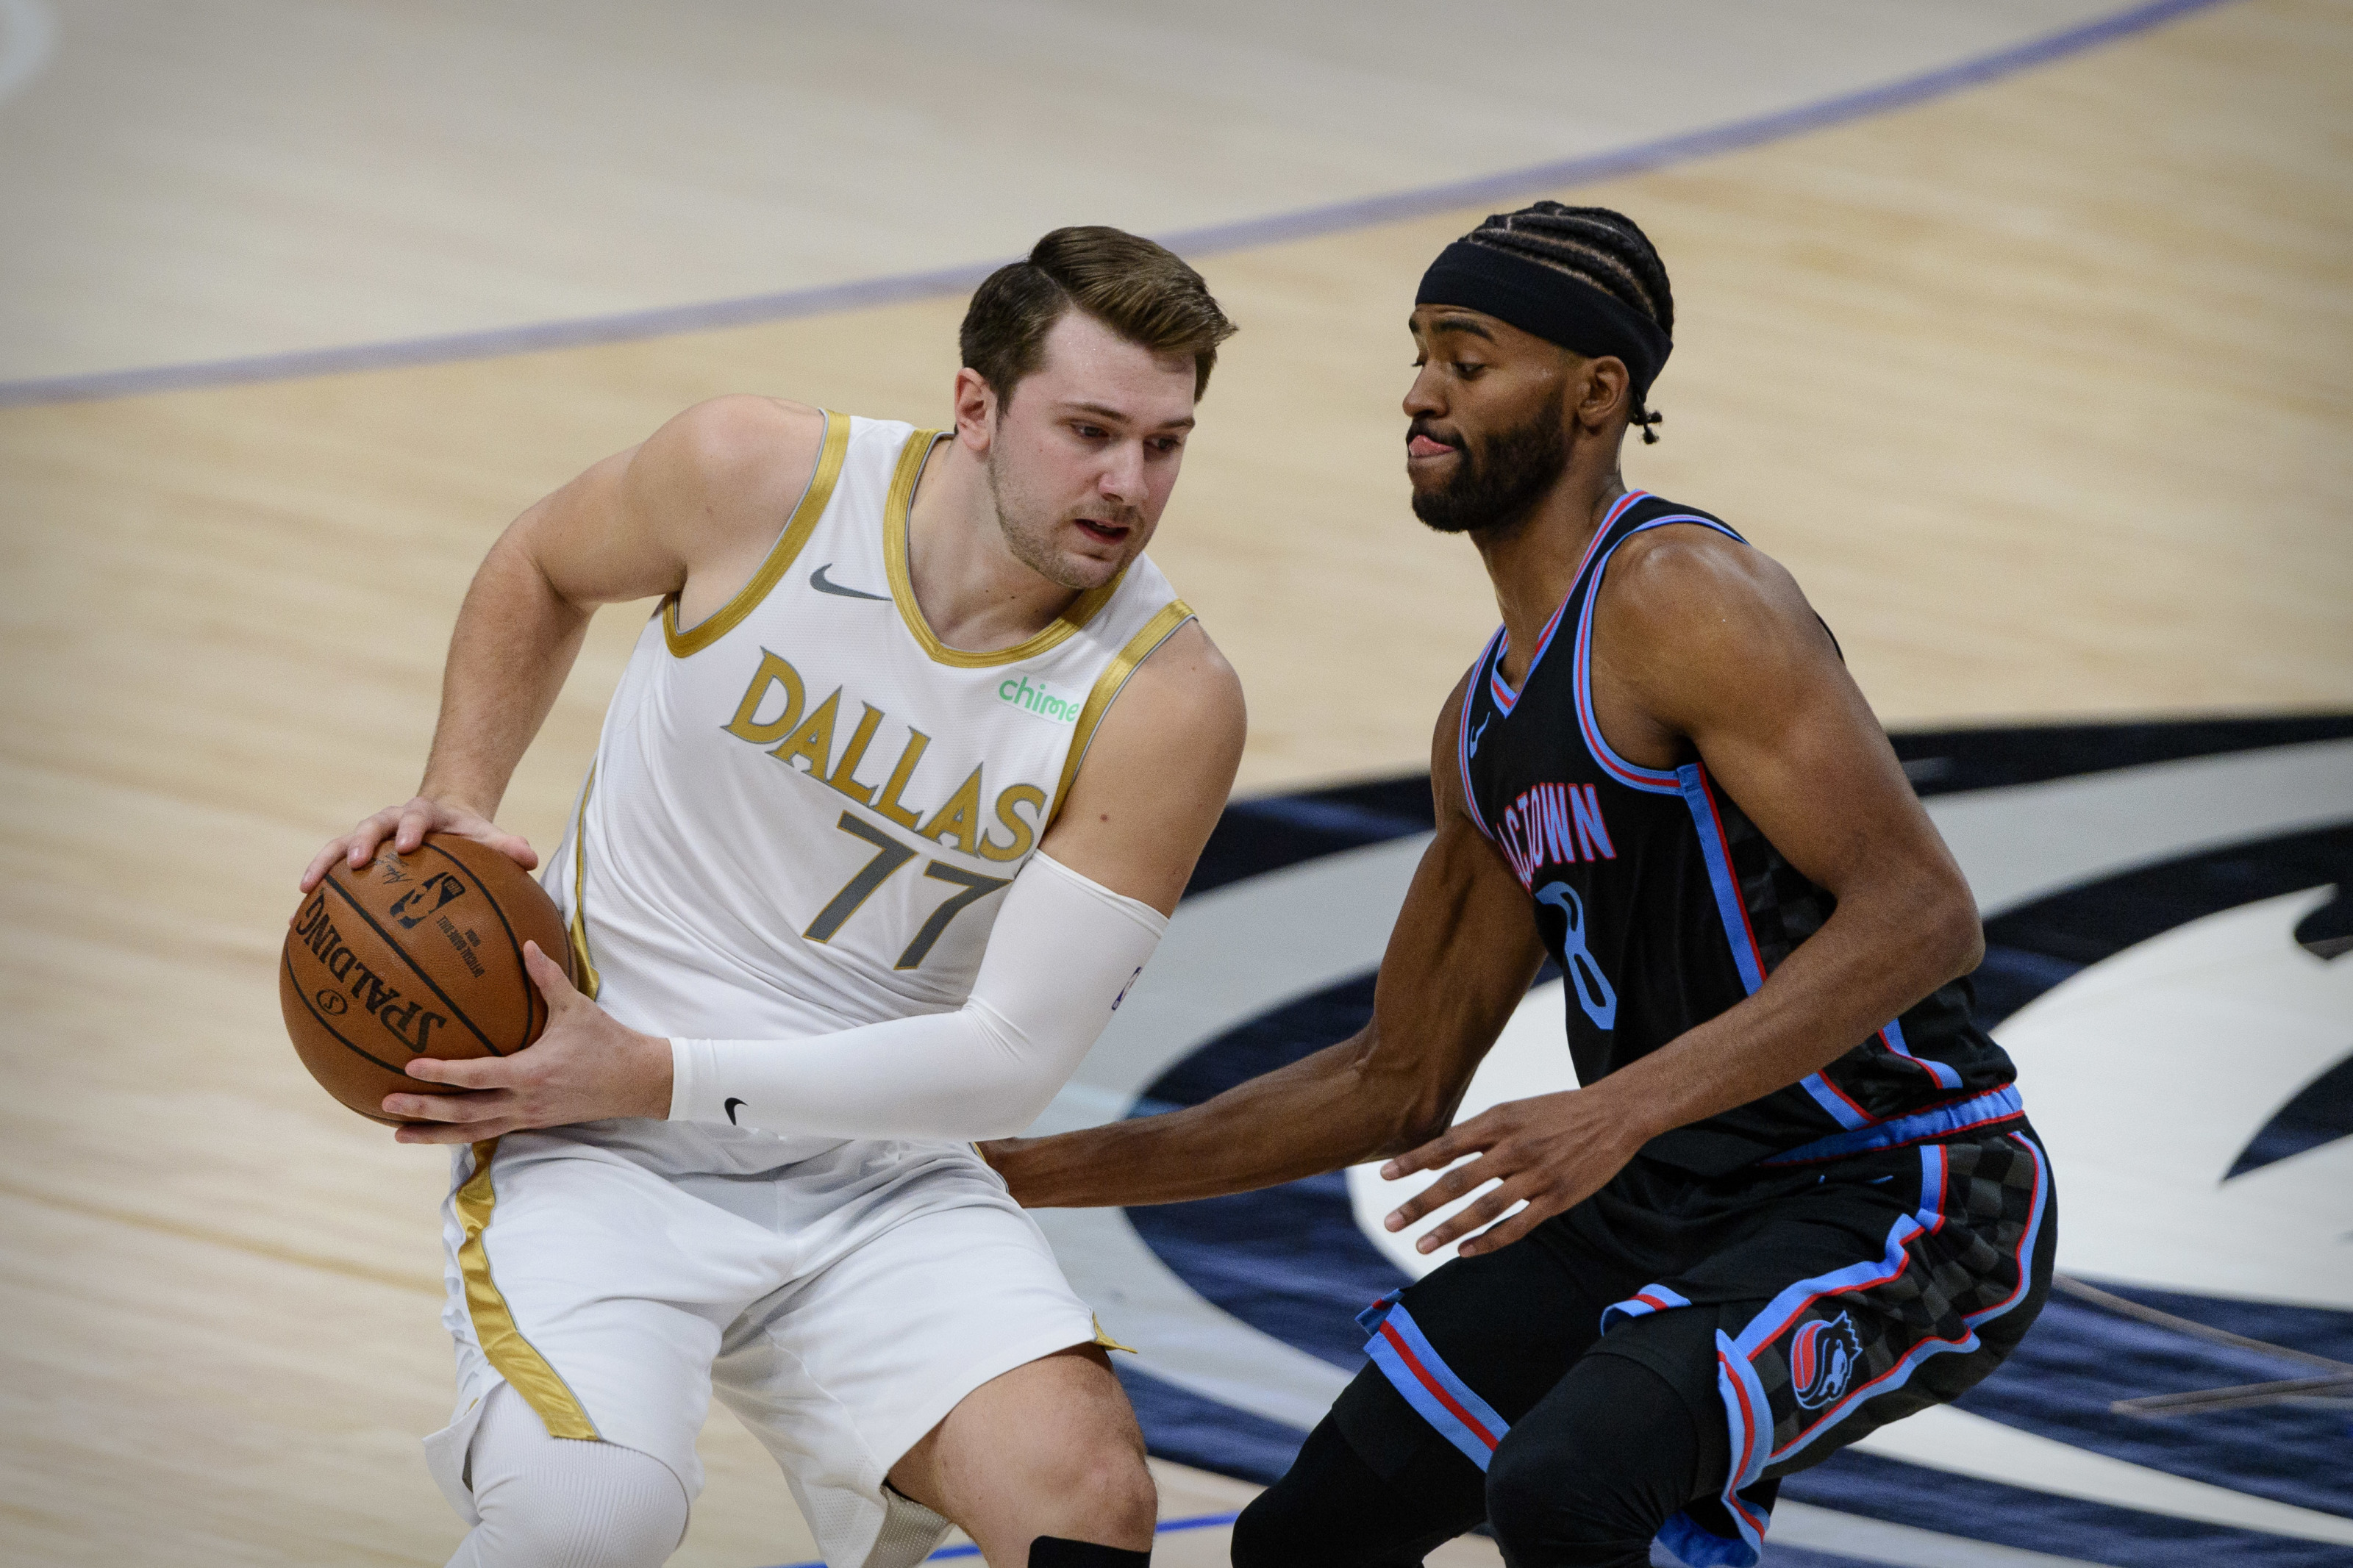 Apr 18, 2021; Dallas, Texas, USA; Sacramento Kings forward Maurice Harkless (8) defends against Dallas Mavericks guard Luka Doncic (77) during the first quarter at the American Airlines Center. Mandatory Credit: Jerome Miron-USA TODAY Sports